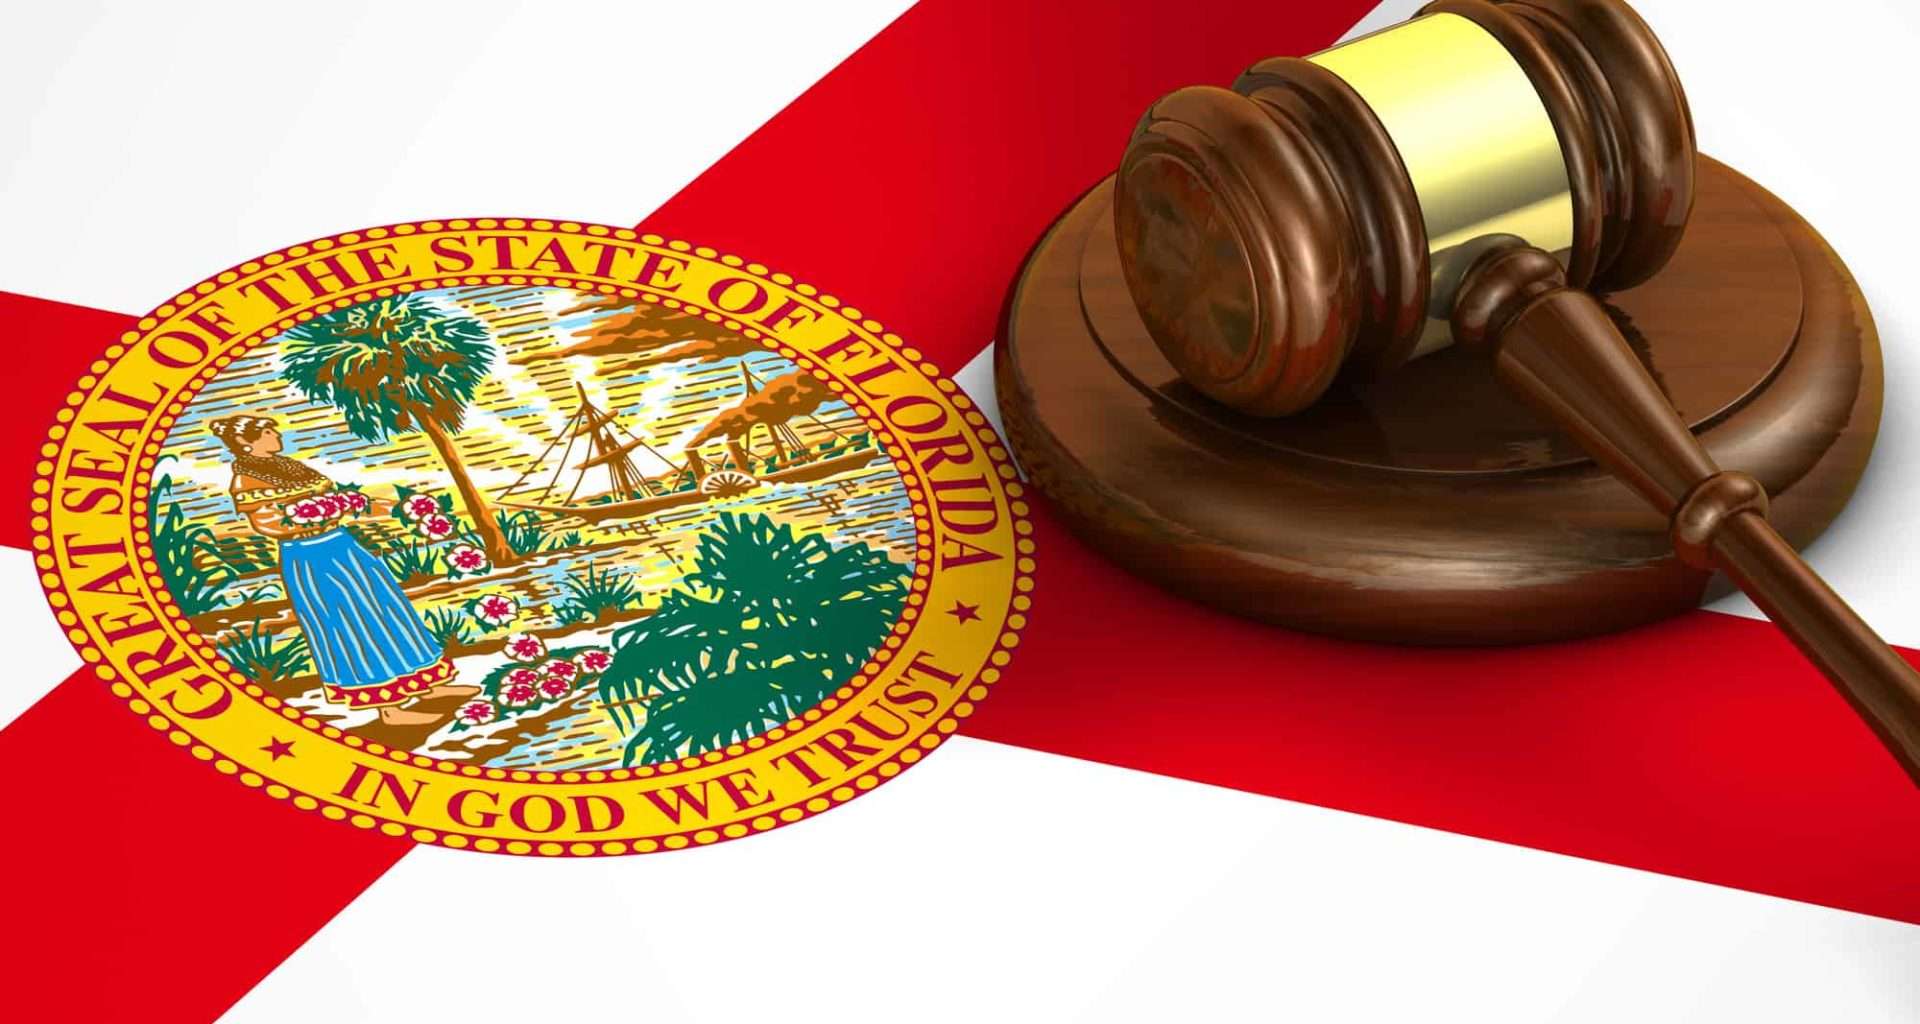 Laws You Should Know Before Moving to Florida